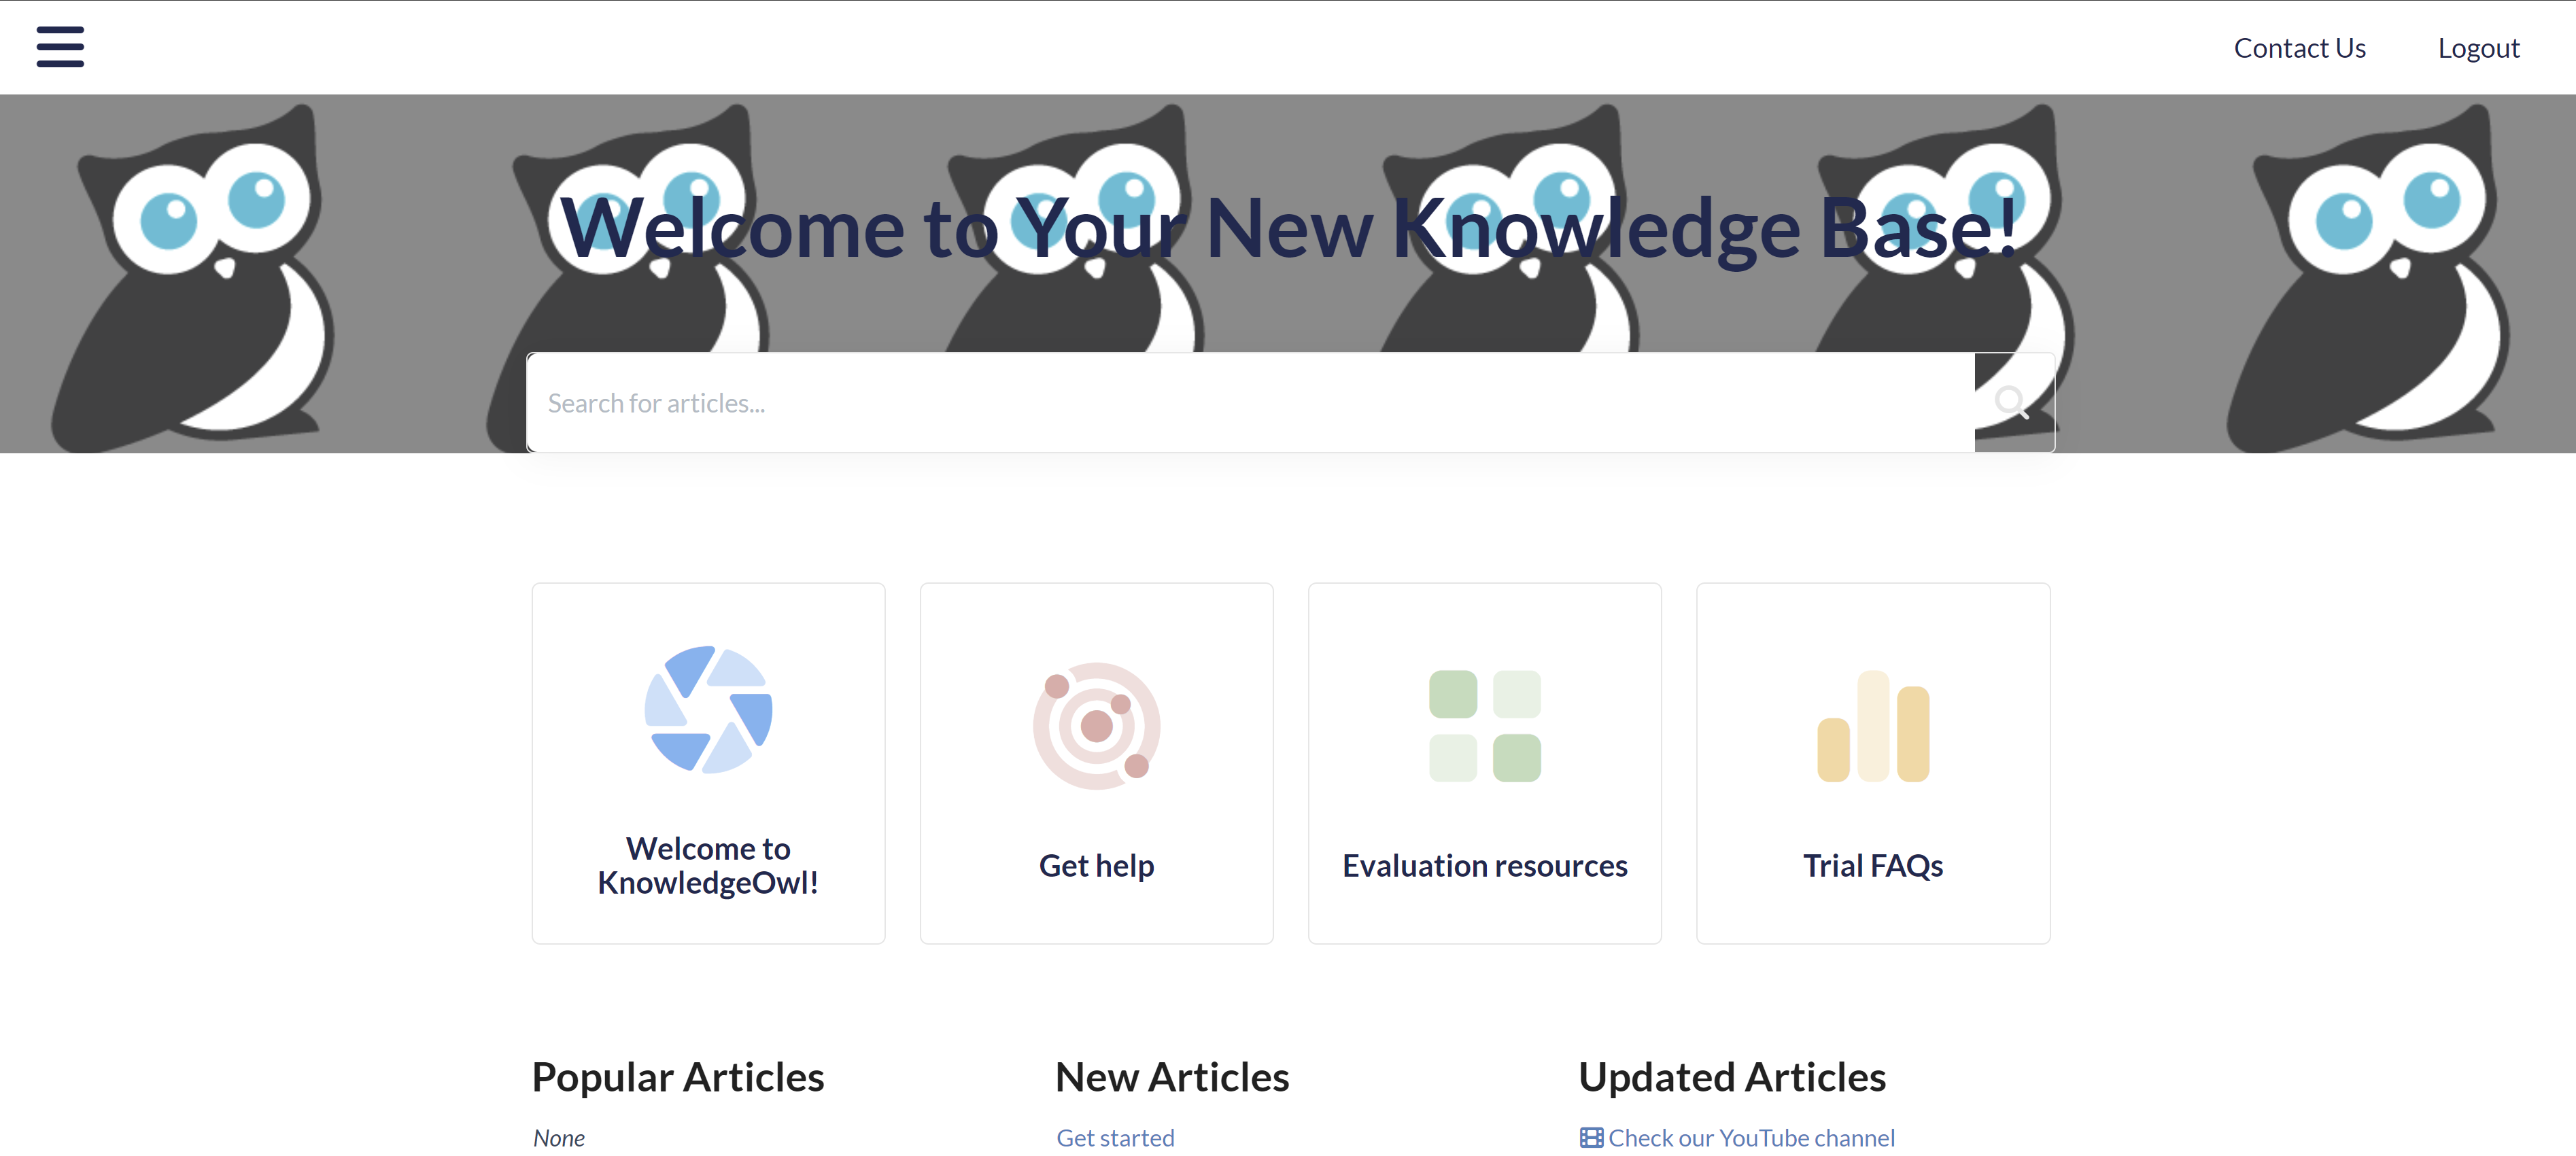 The homepage of a live knowledge base. An image of Linus, the KnowledgeOwl mascot, repeats six times across the top of the page.